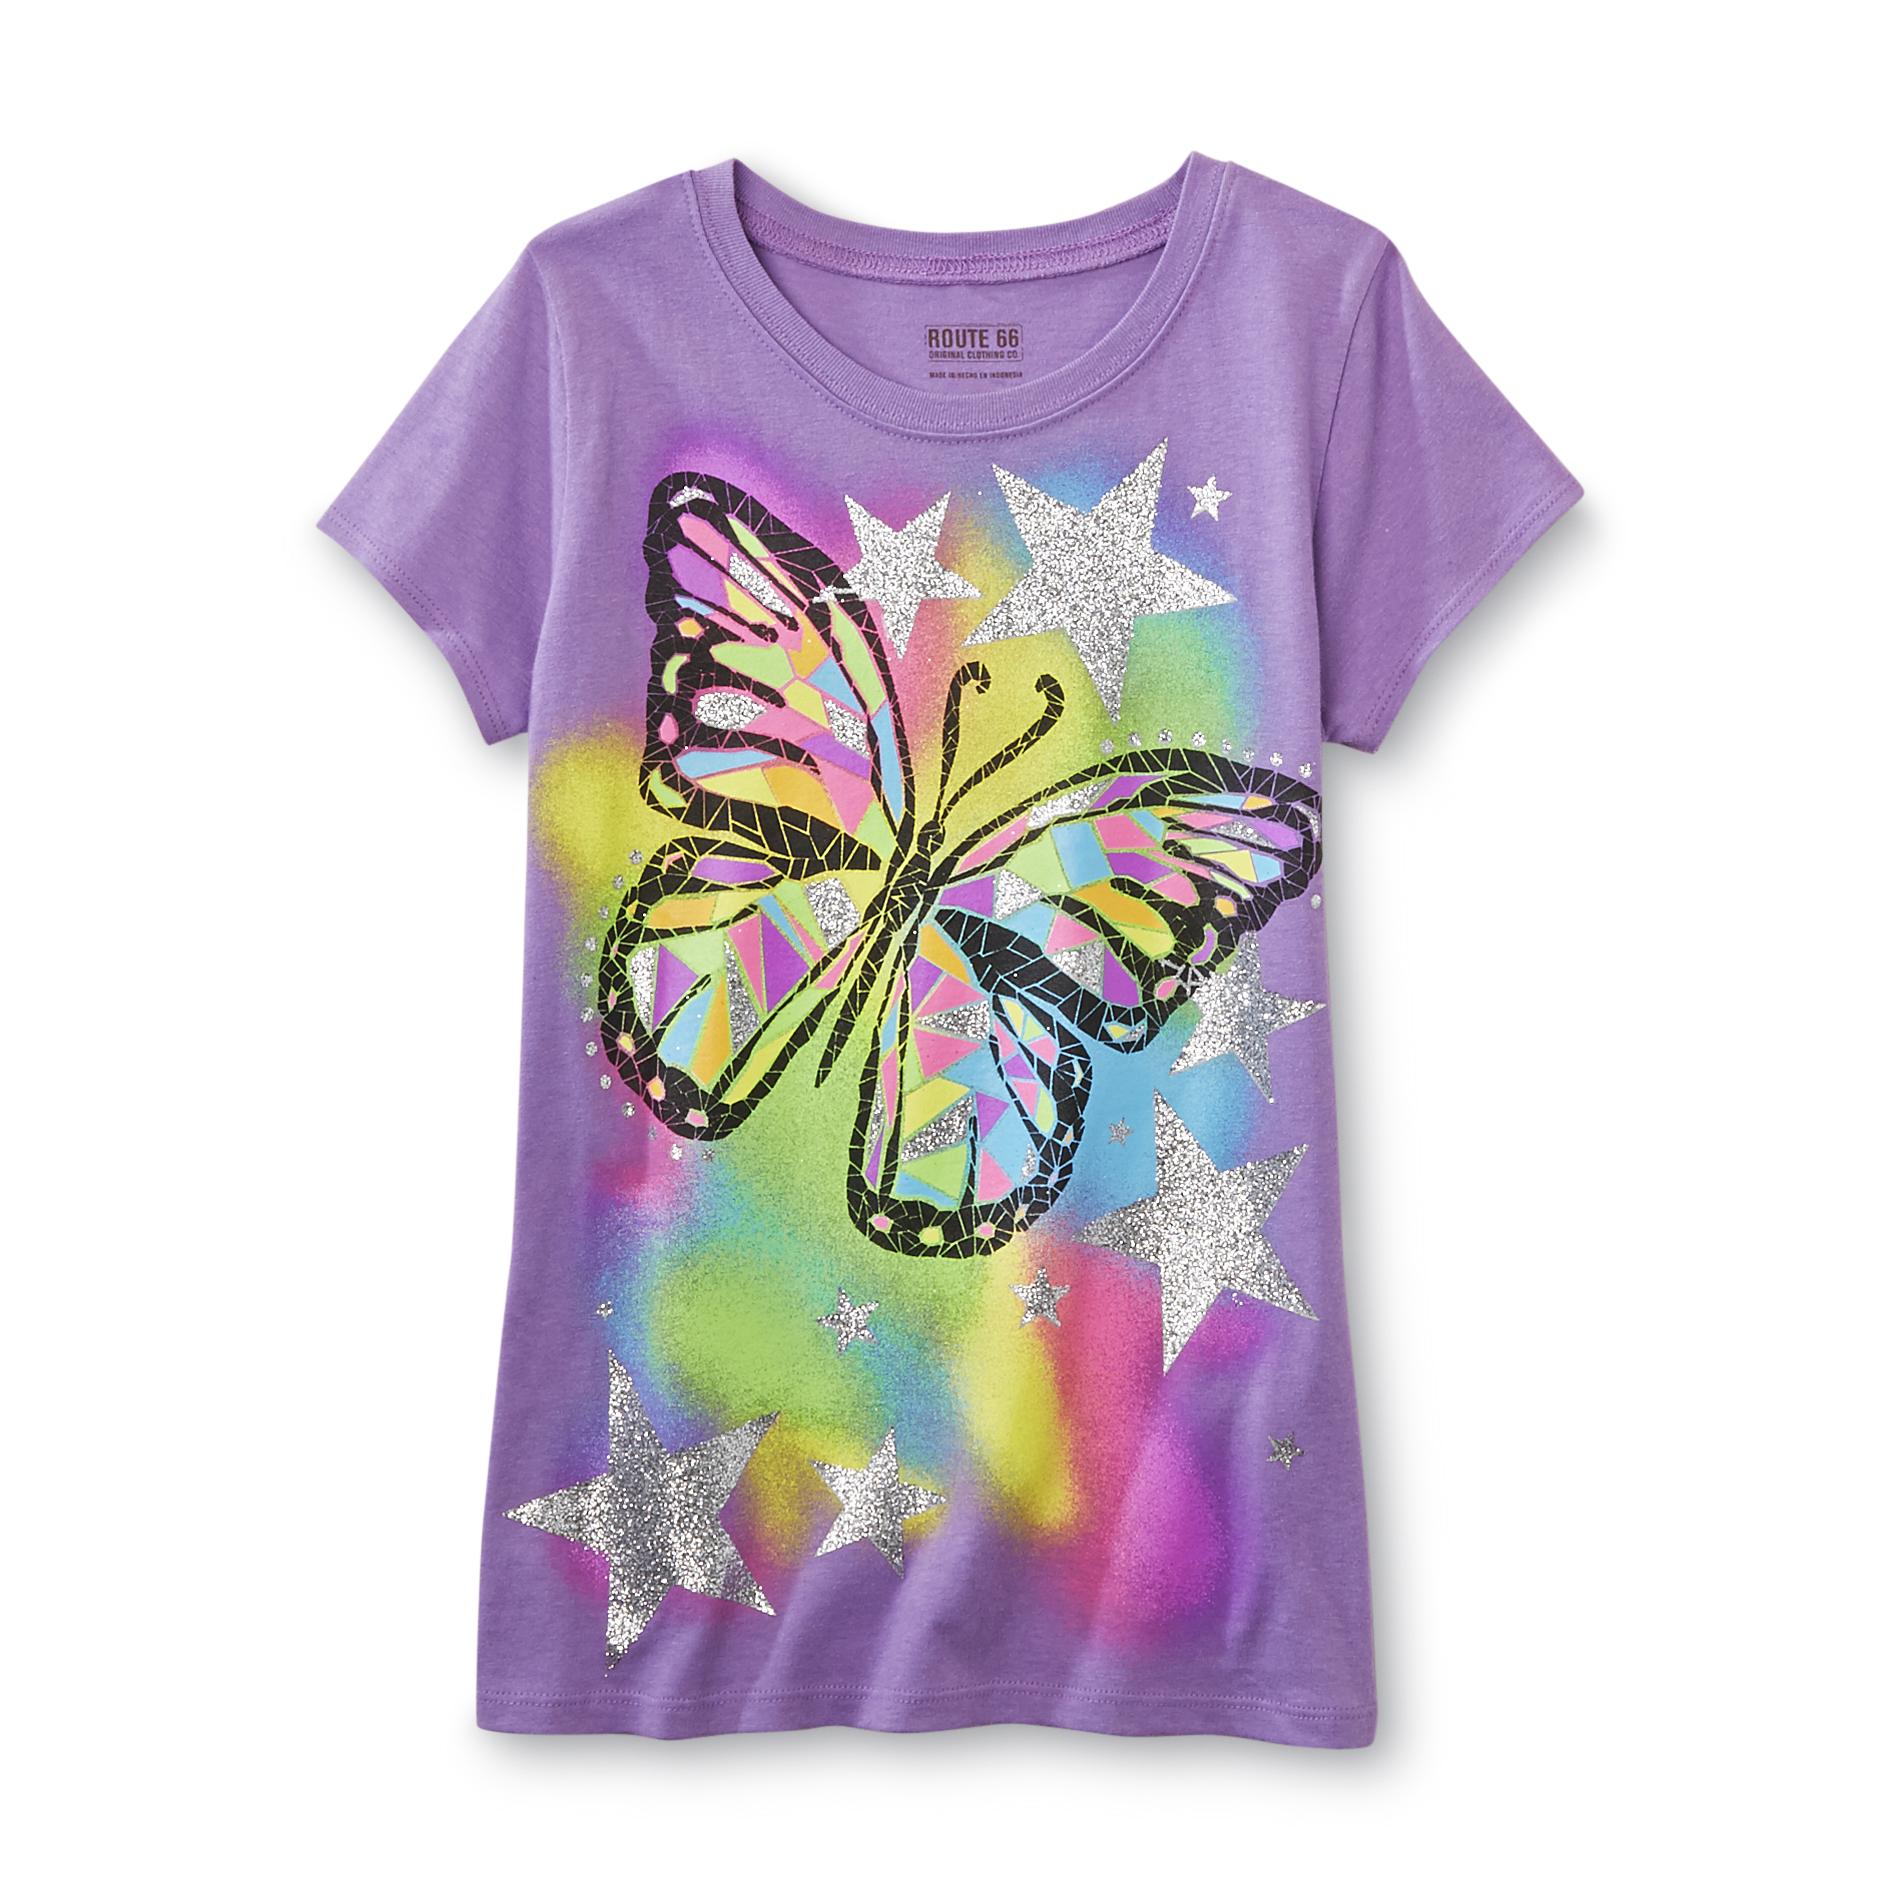 Route 66 Girl's Graphic T-Shirt - Glittery Butterfly